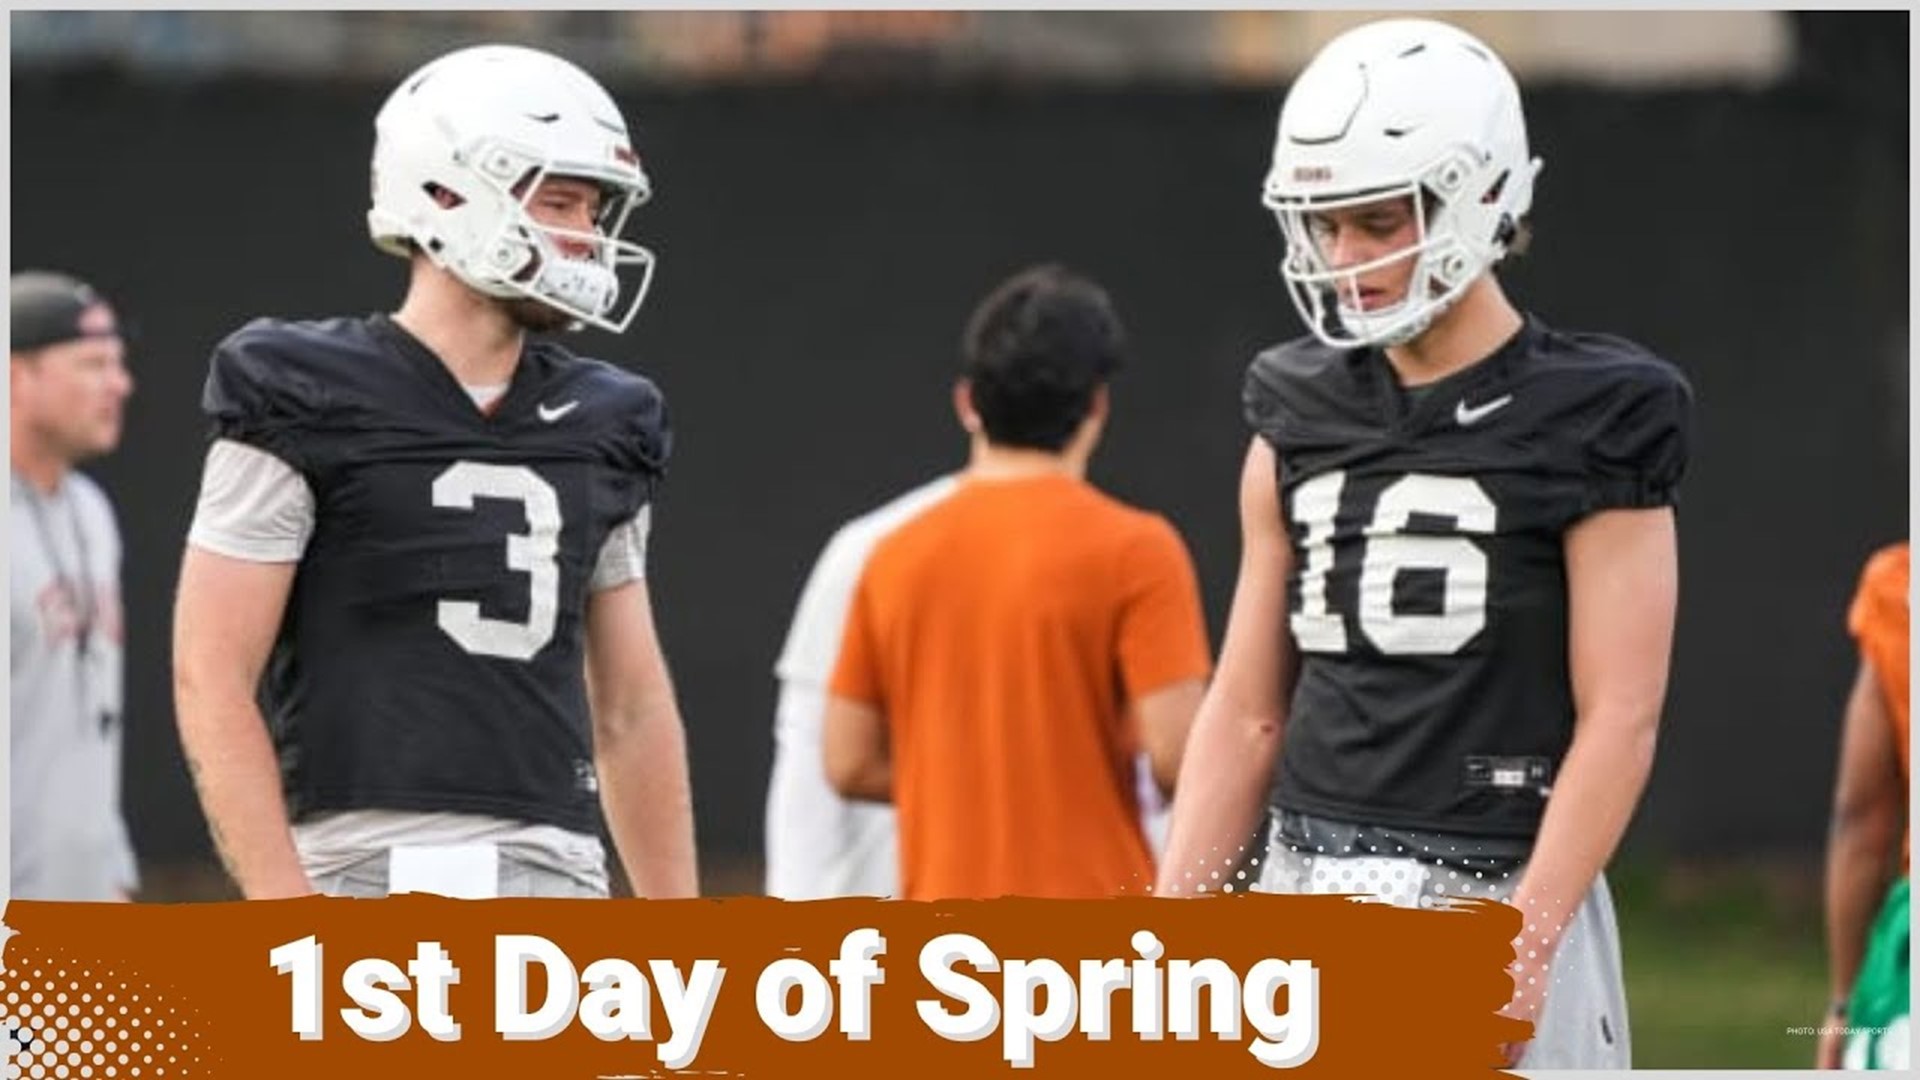 Today is one of the best days of the year, as the Texas Longhorns Football team will begin spring practices today, and will conclude with the orange and white game